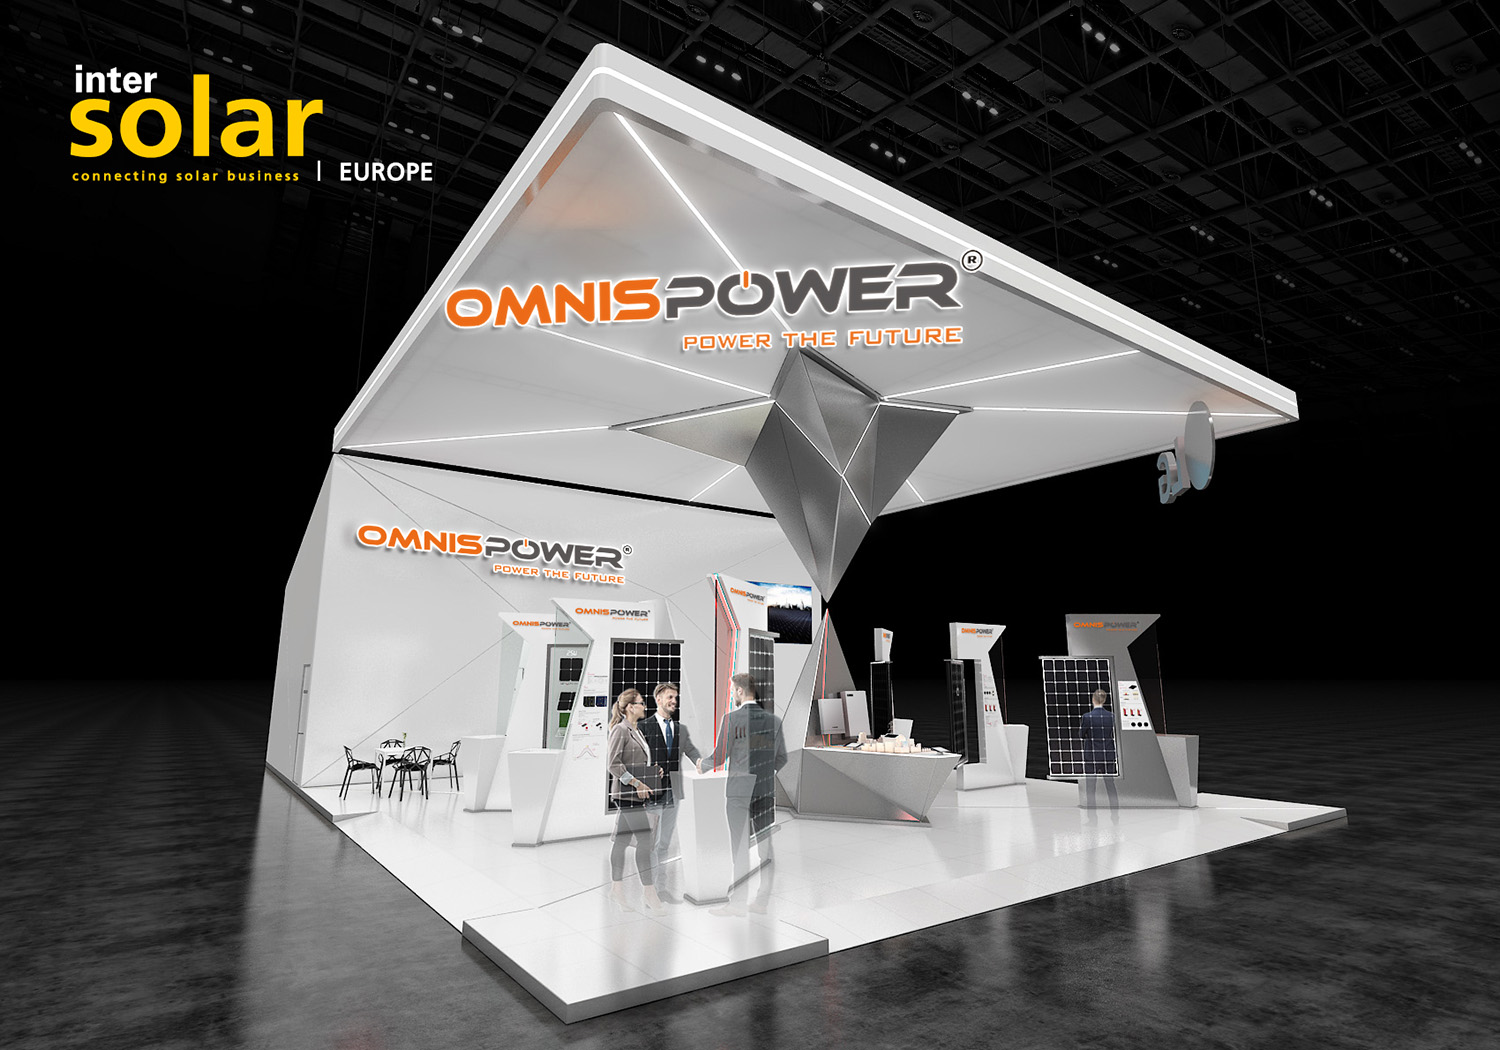 Omnis Solar Power WILL SHOW UP WITH INTERSOLAR EUROPE 2019 IN MUNICH.